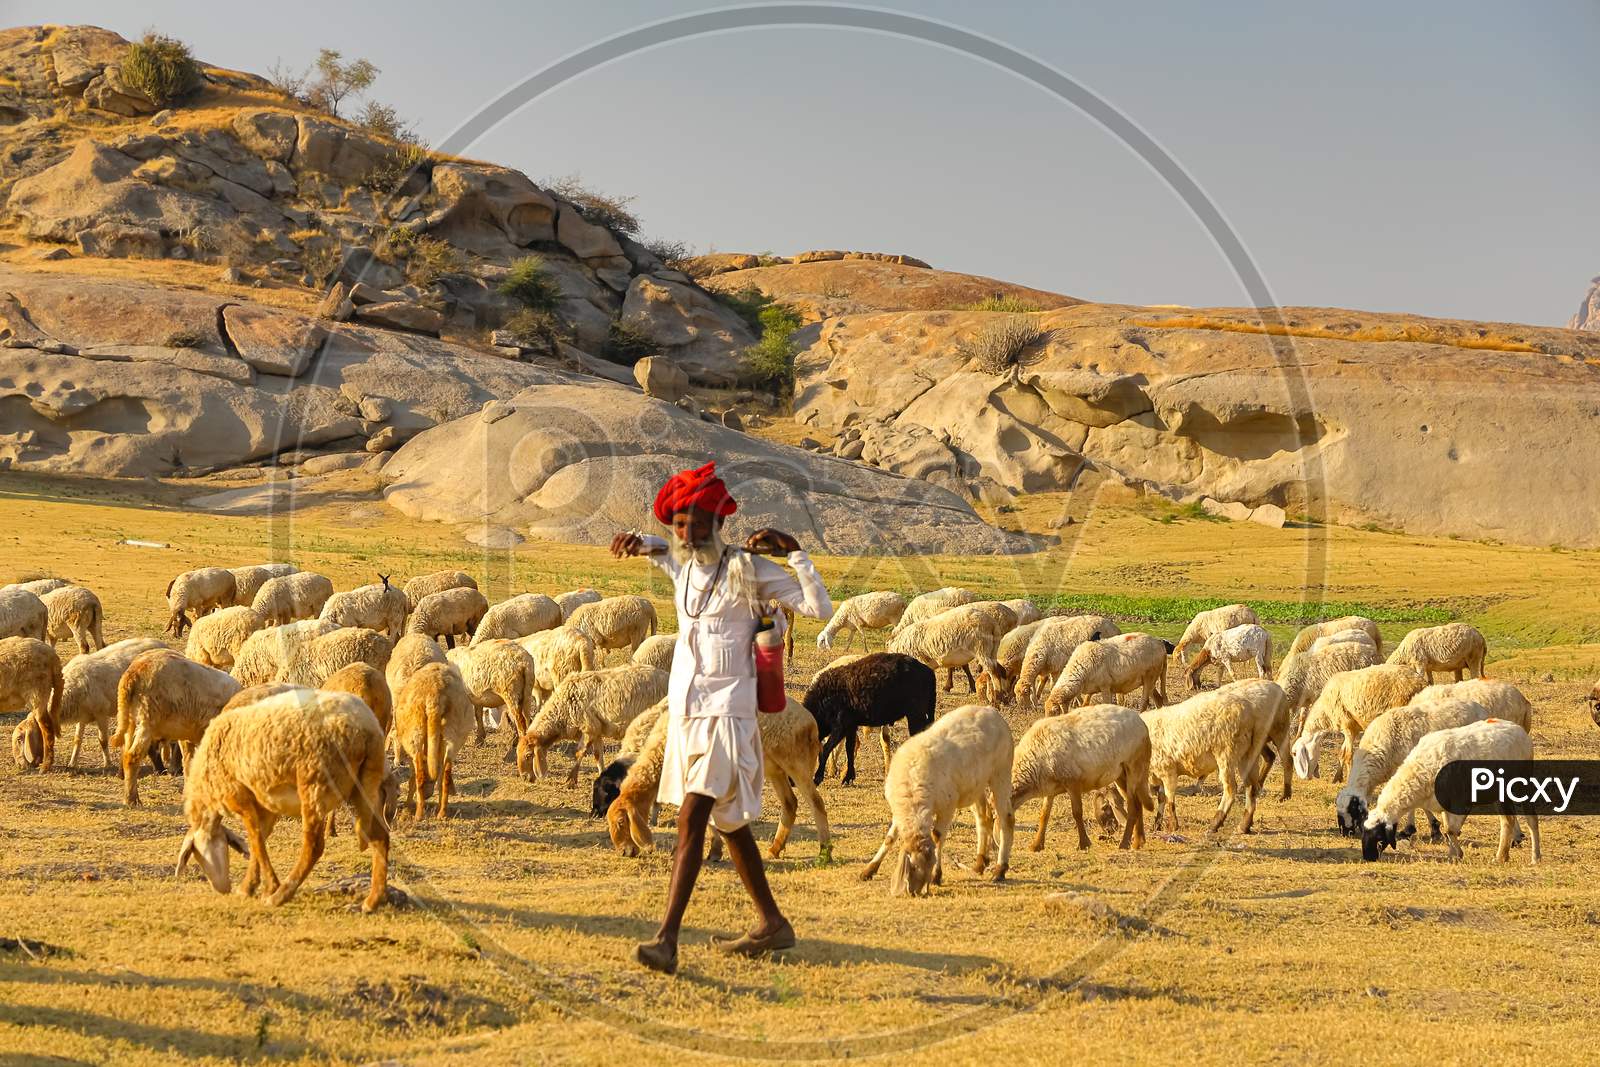 A Shepard walking with his cattle grazing in the grasslands at Jawai